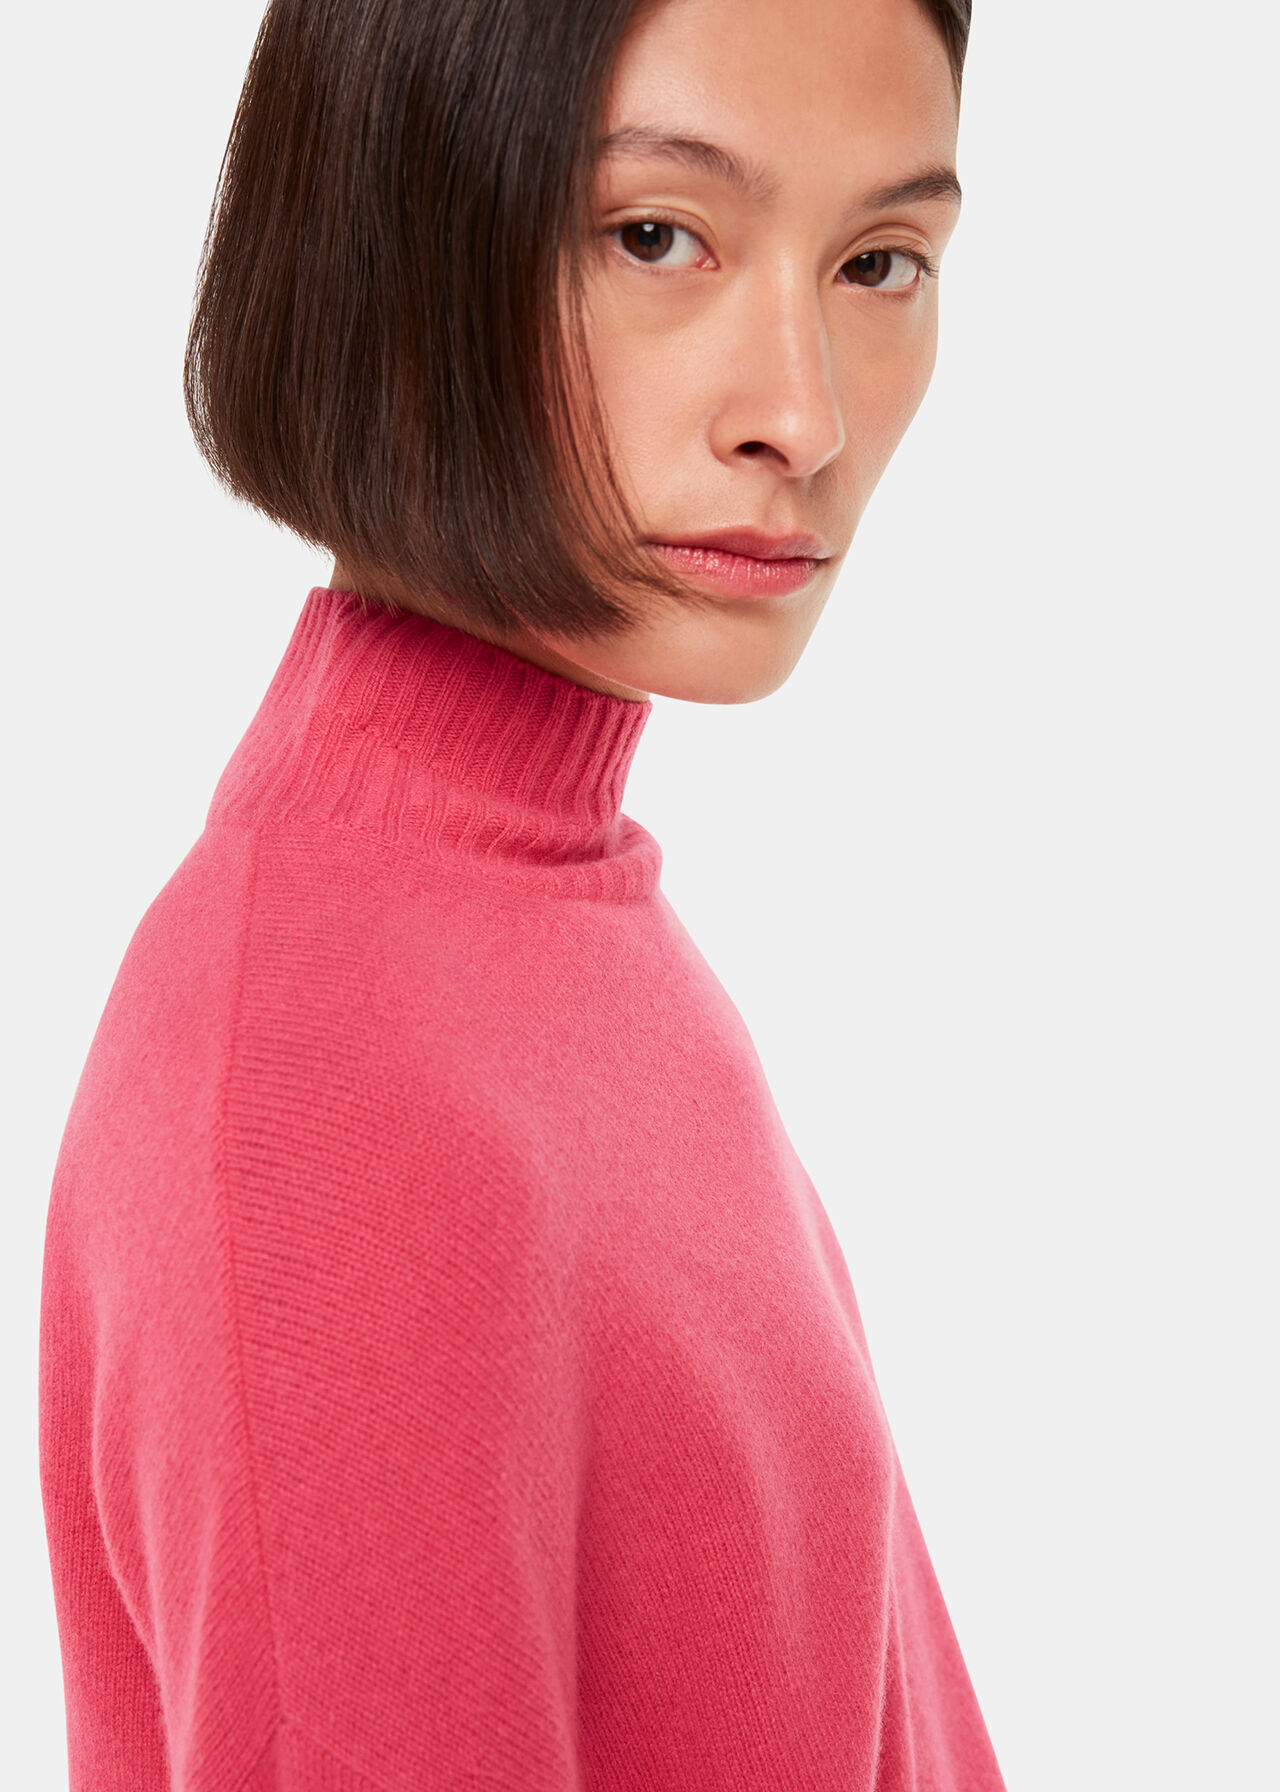 Shop the Pink Wool Funnel Neck Jumper at Whistles